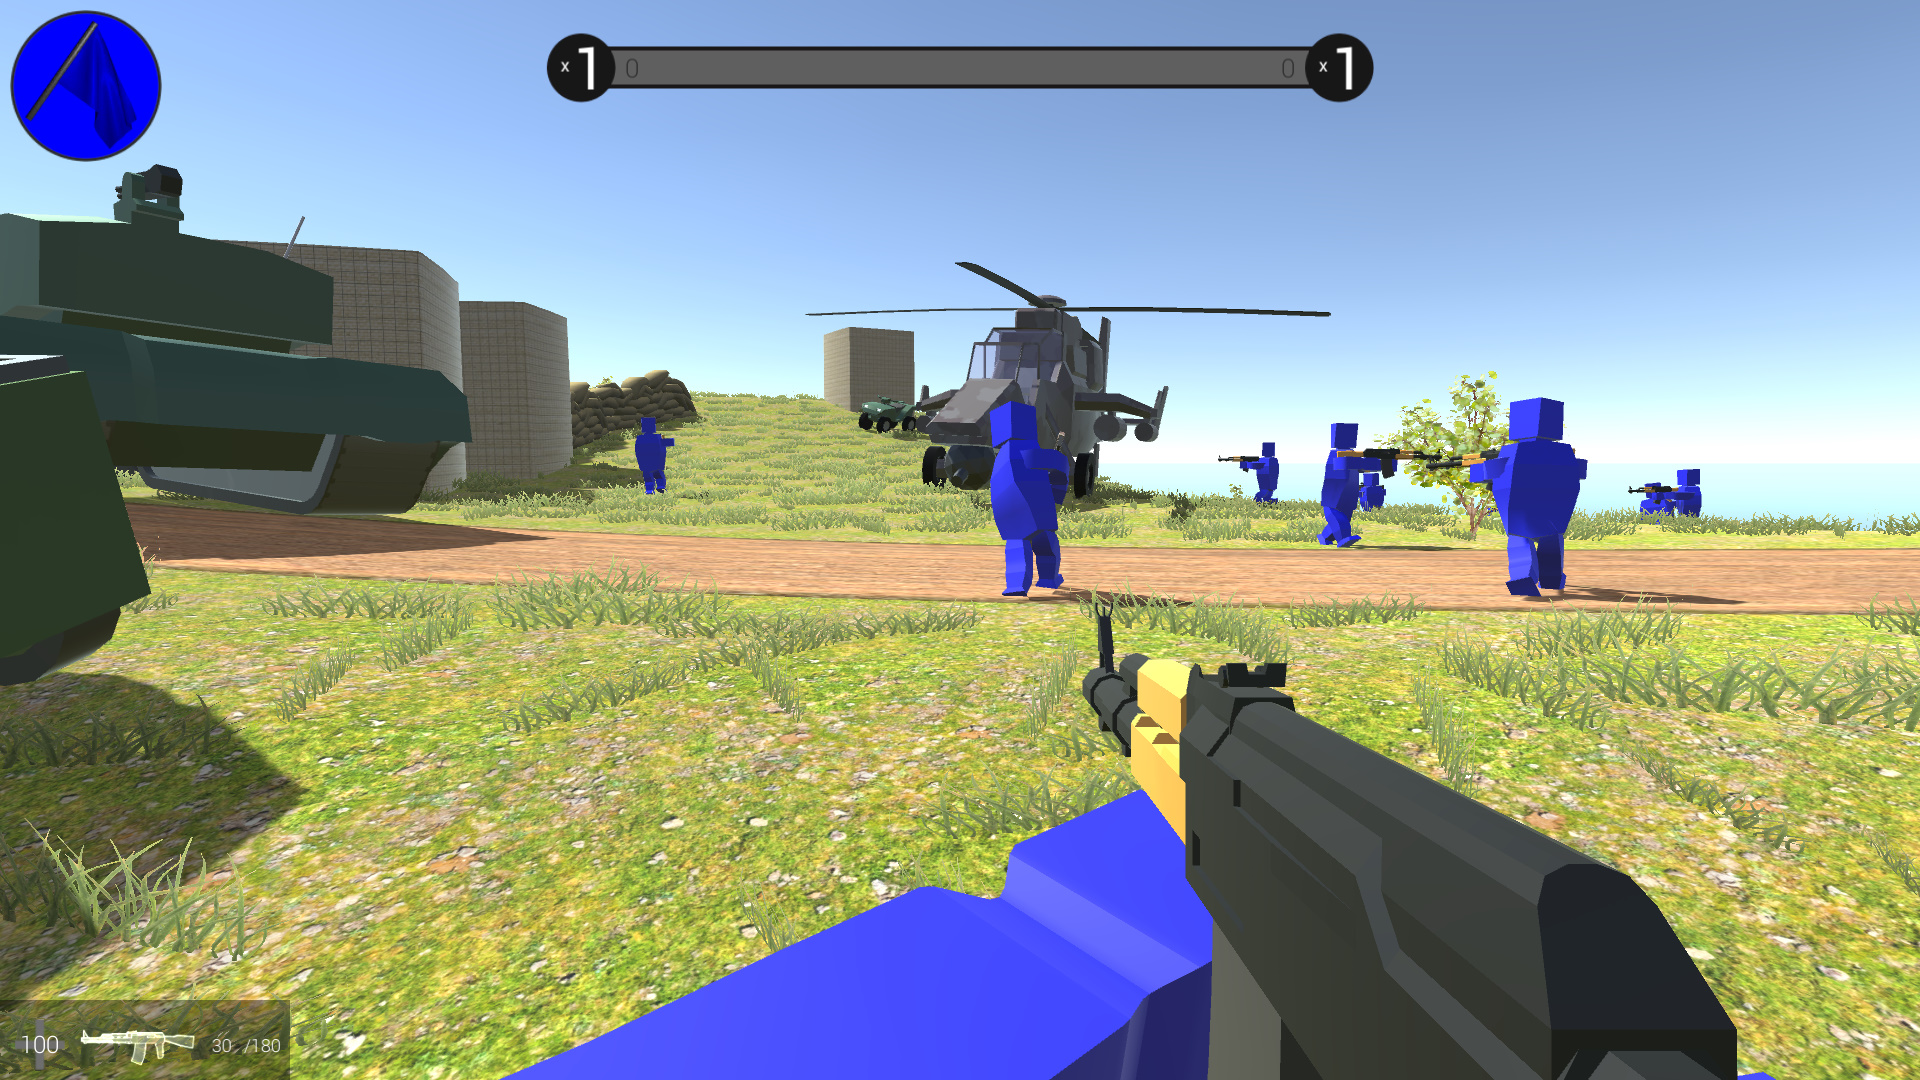 Ravenfield game android | Ravenfield Game Guide Mod Apk - 2019-01-09
